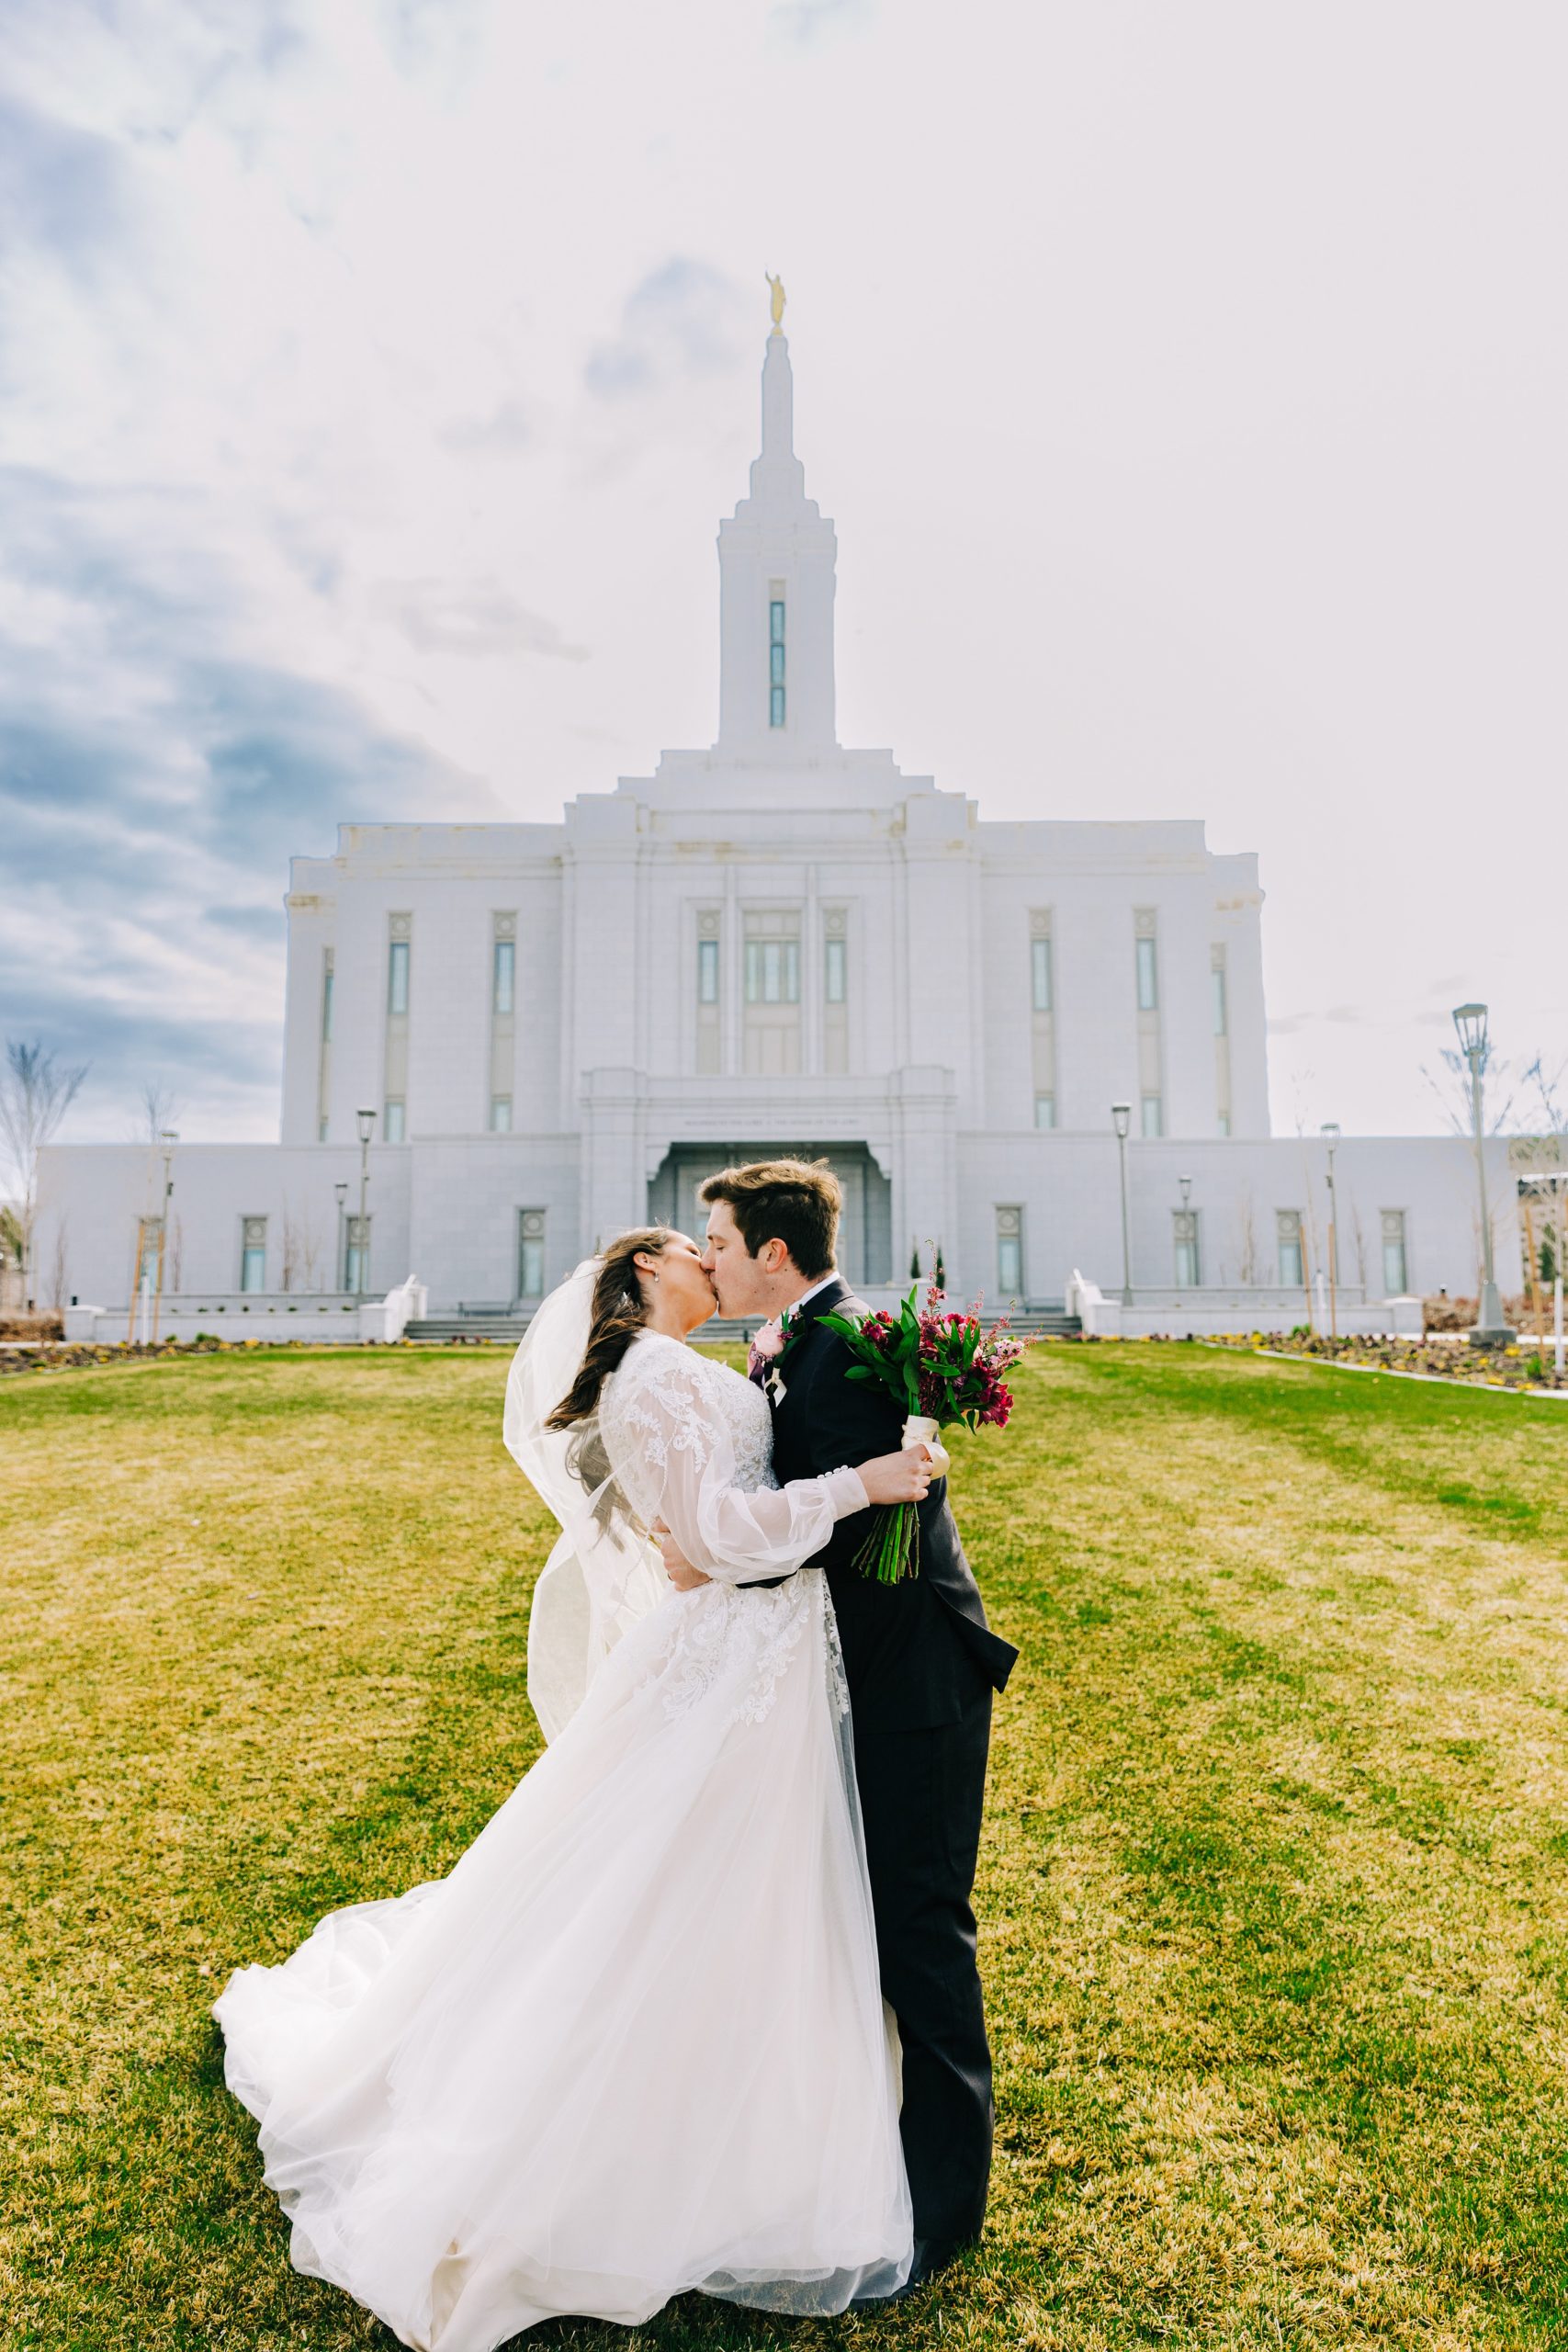 brides dress and veil flow in the wind on lds pocatello temple lawn